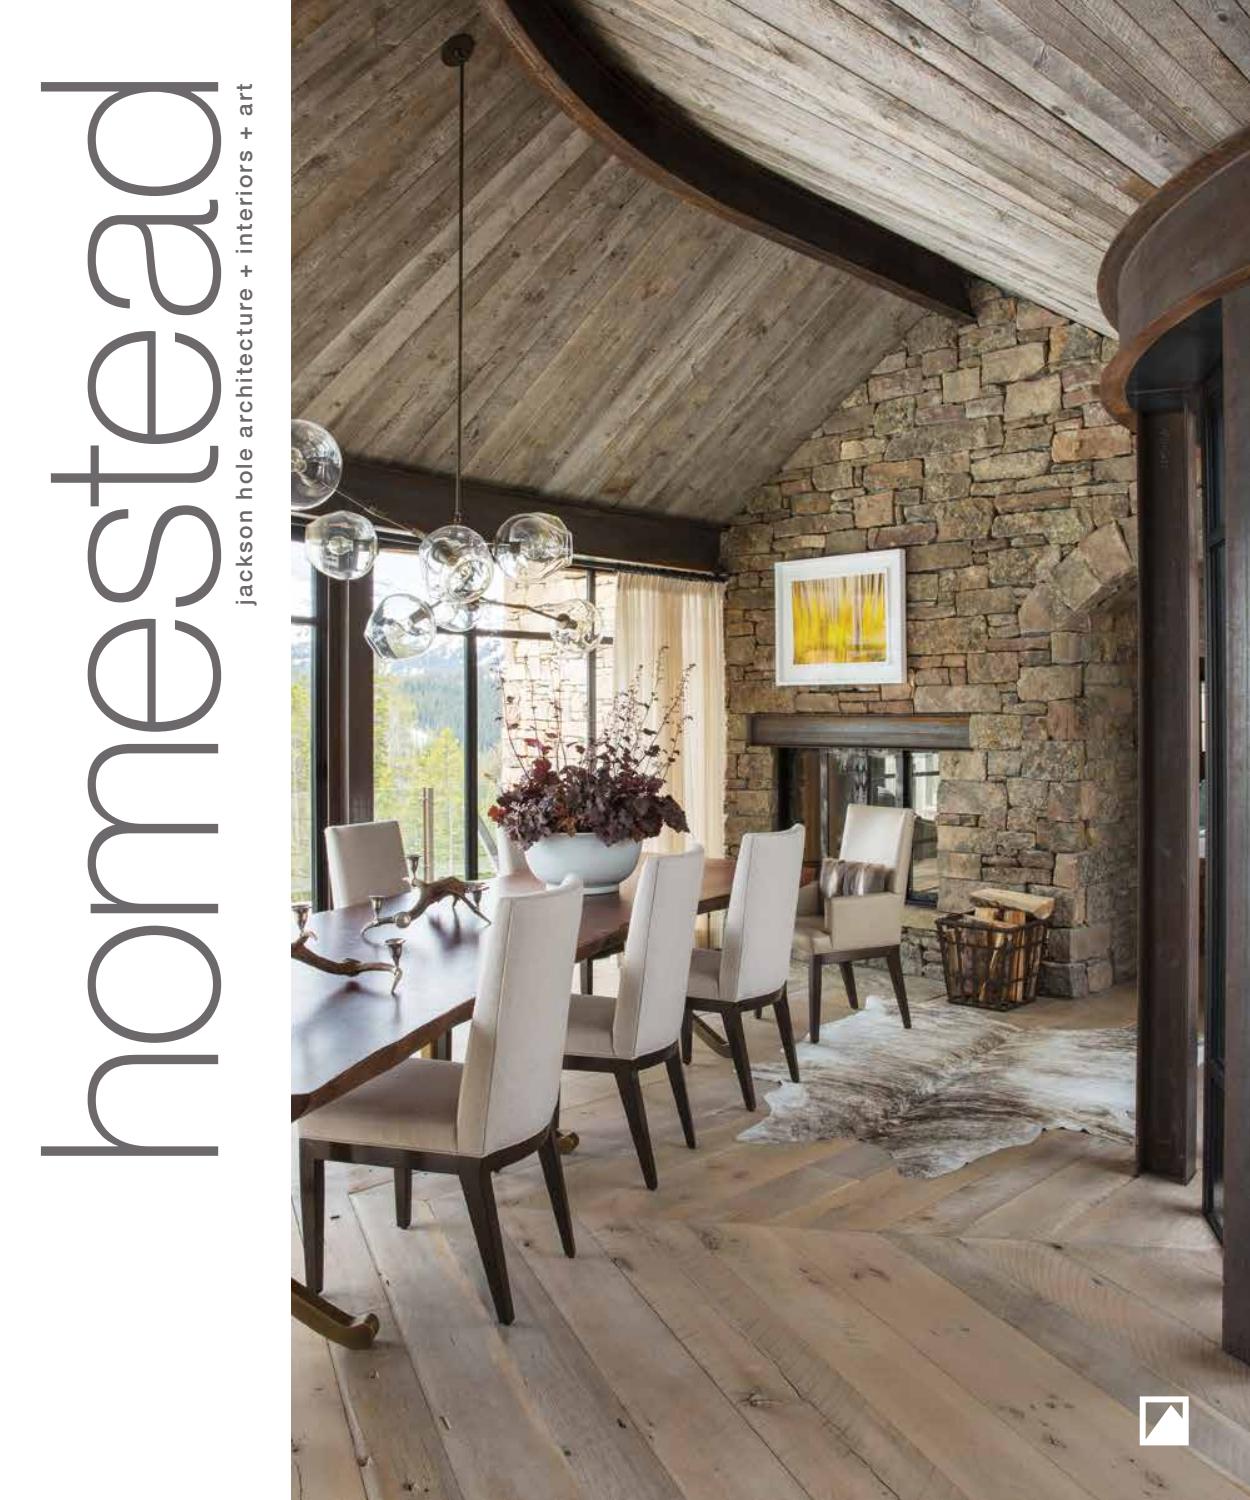 Double Sided Fireplace Problems Awesome 2019 Homestead Magazine by Circ Design issuu